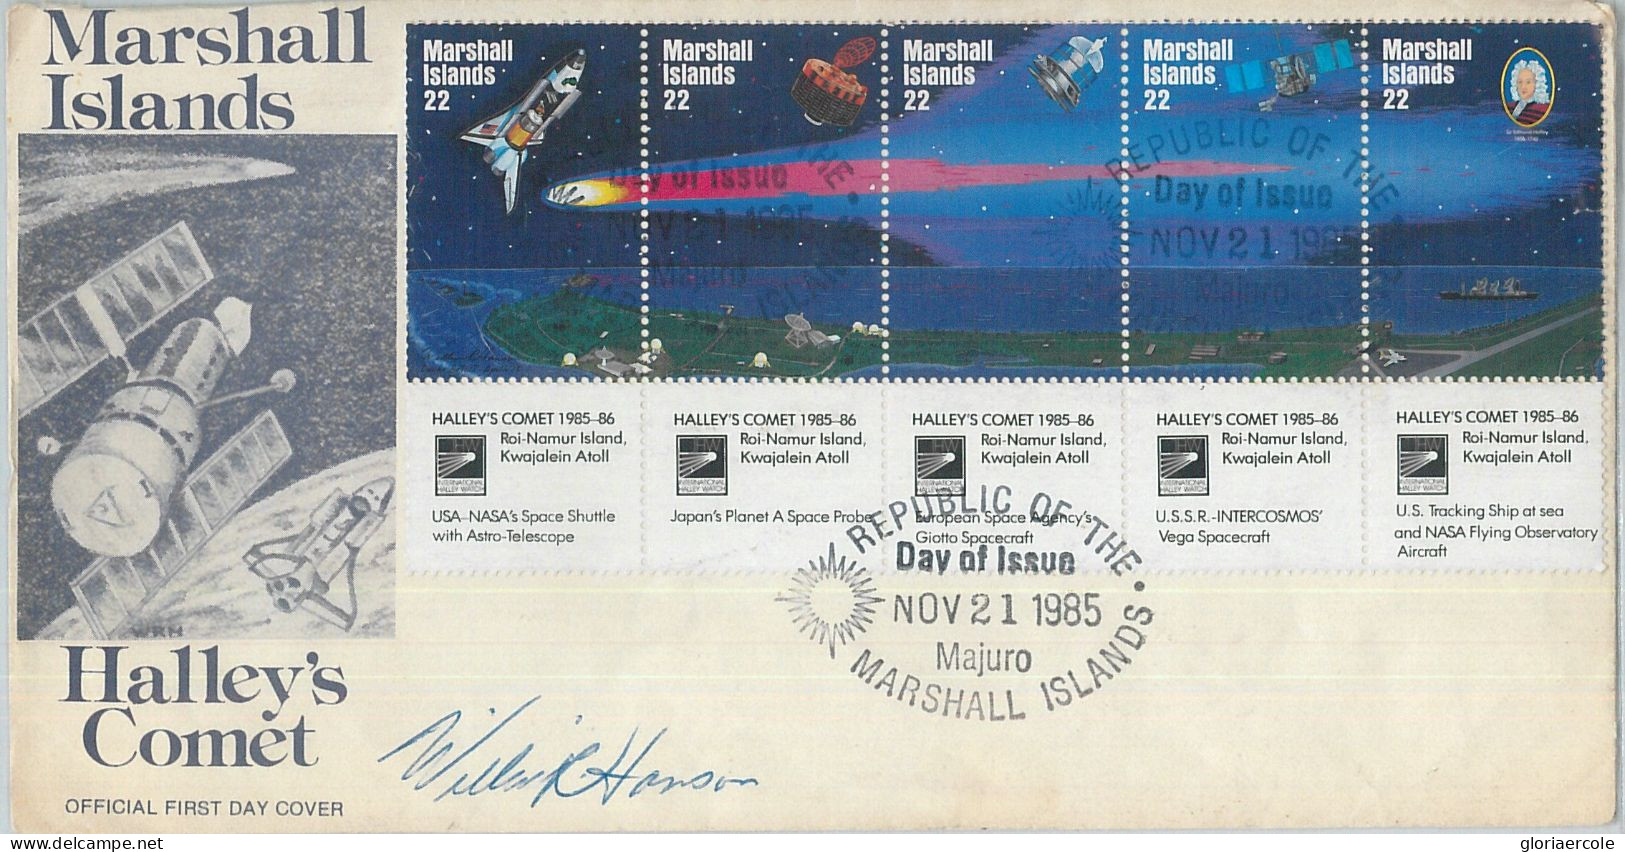 75974 - MARSHALL  ISLANDS - Postal History - FDC Cover 1985 Halley's Comet SPACE - SIGNED By Stamp Designer! - North  America